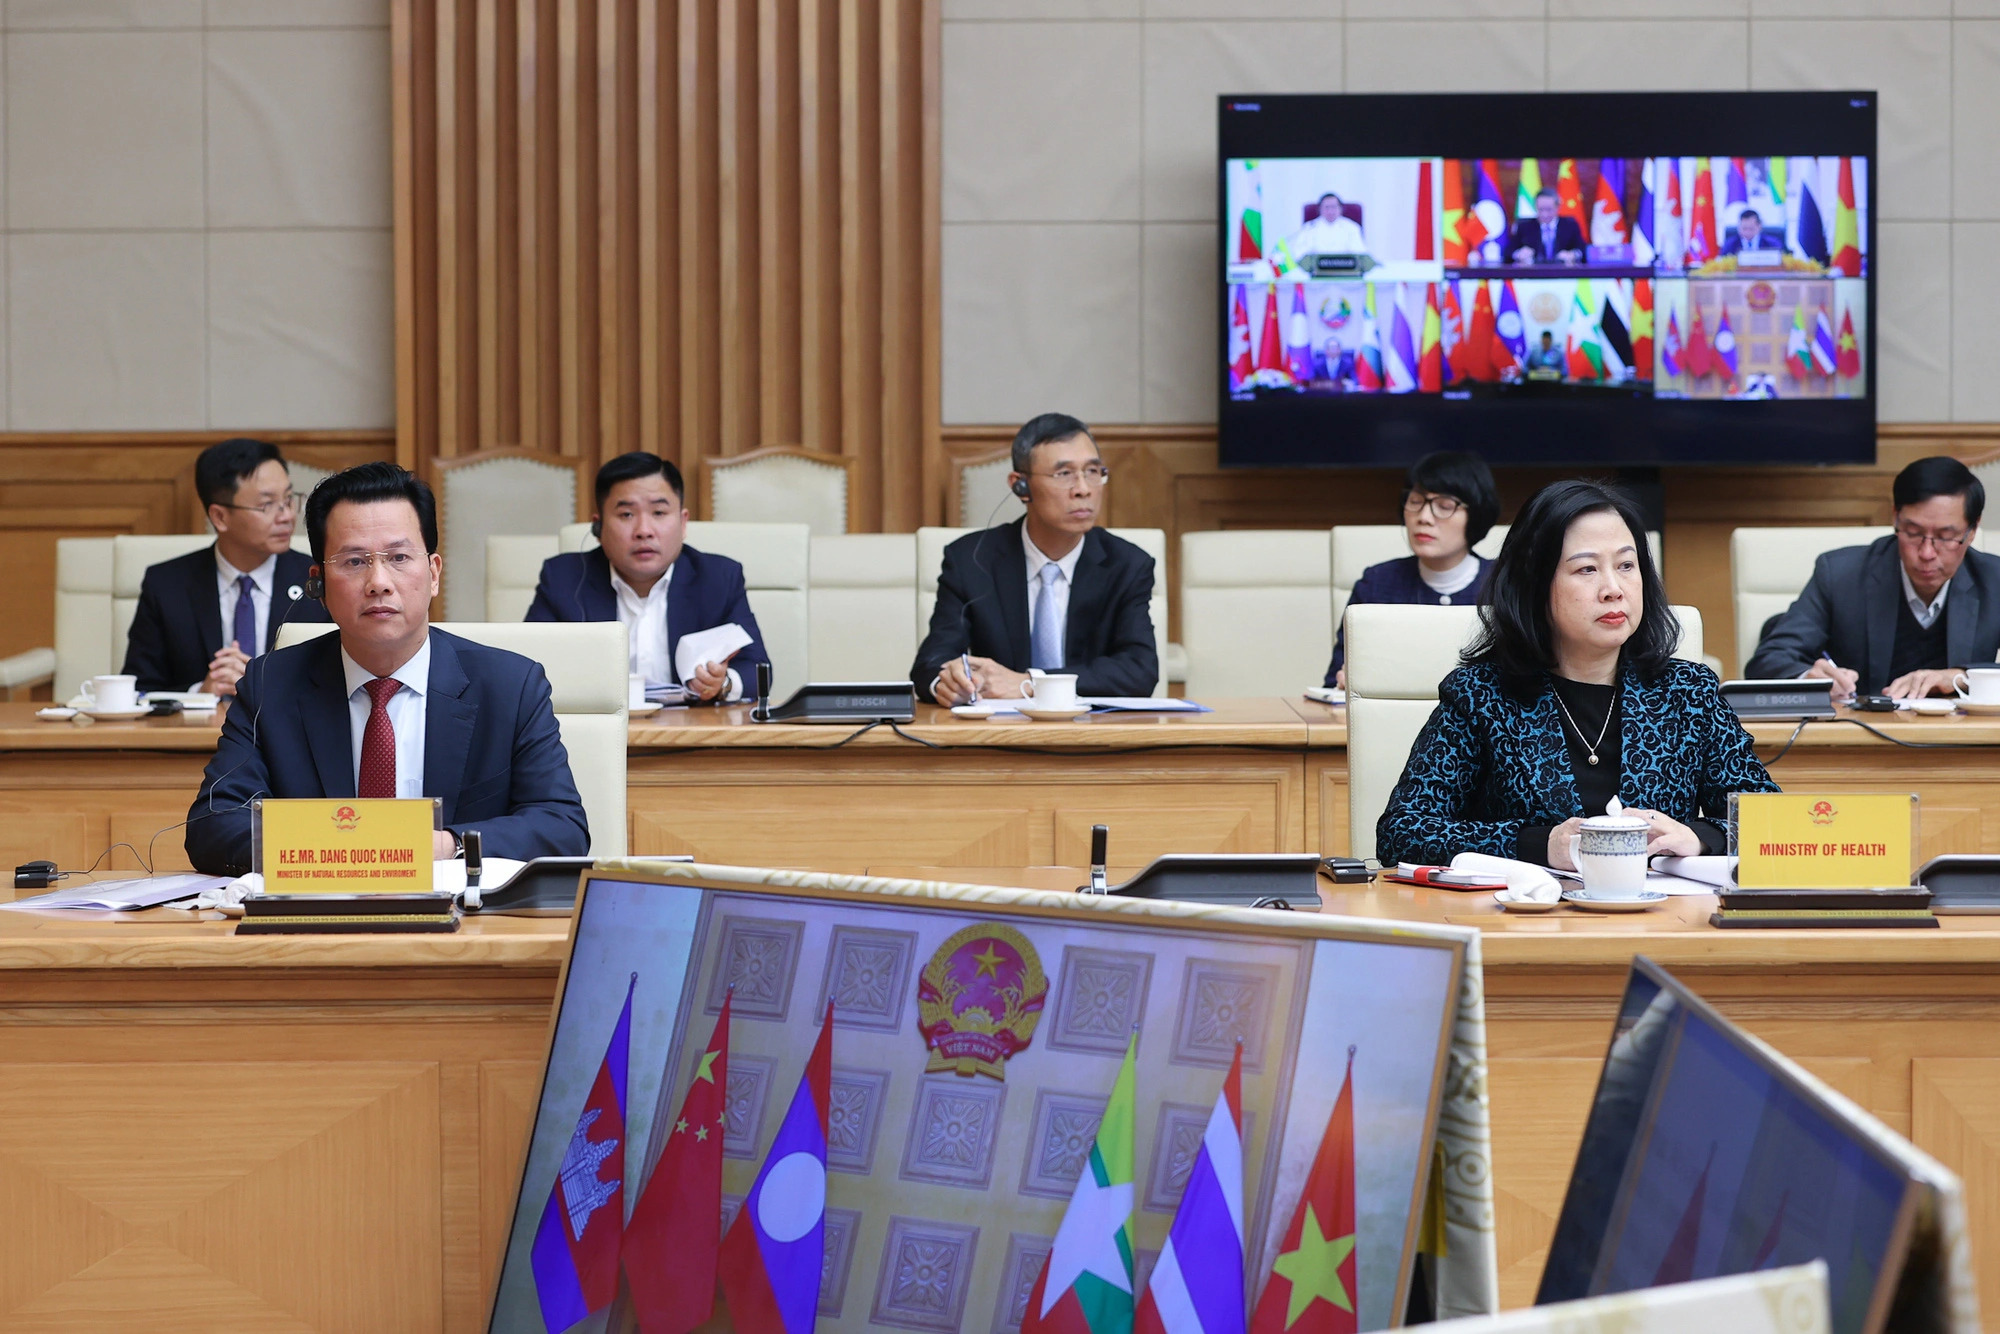 The virtual meeting, themed ‘Join Hands on the Building of a Community of Shared Future and Modernization among Mekong-Lancang Countries’, was attended by government leaders and officials of the six Mekong-Lancang countries including Vietnam, Laos, Cambodia, Thailand, Myanmar, and China. Photo: VGP